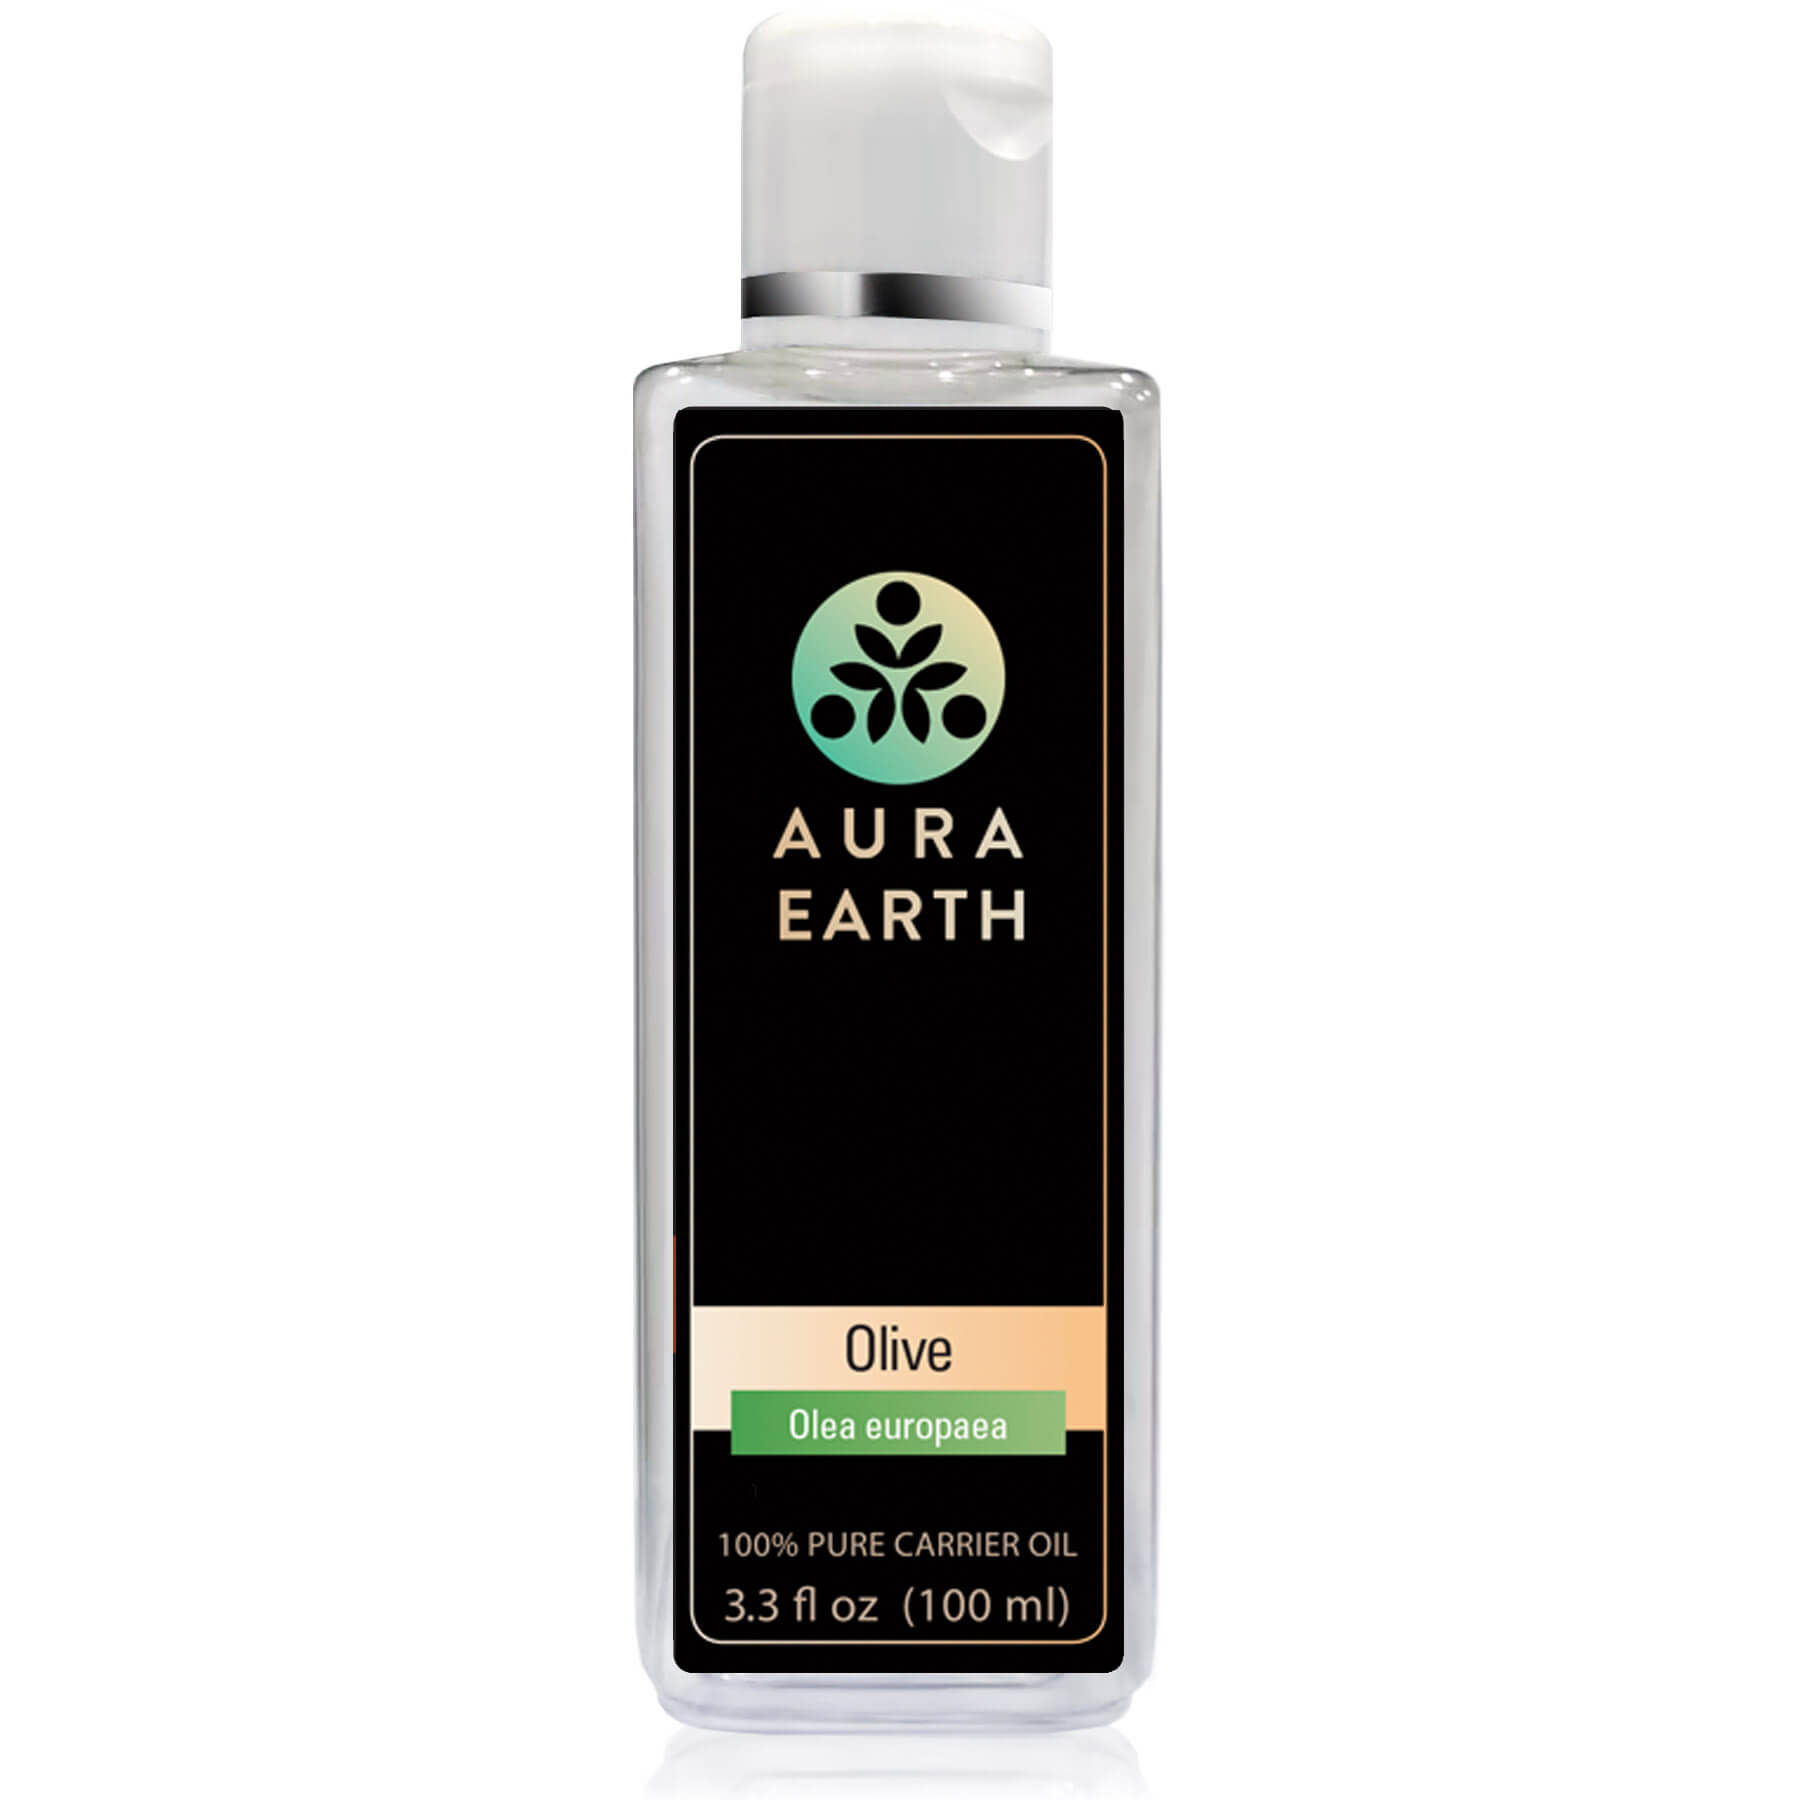 GOLD CROESUS - AURA LAURIEN - ULTRA LUXURY MEDICINAL WILD OLIVE OIL